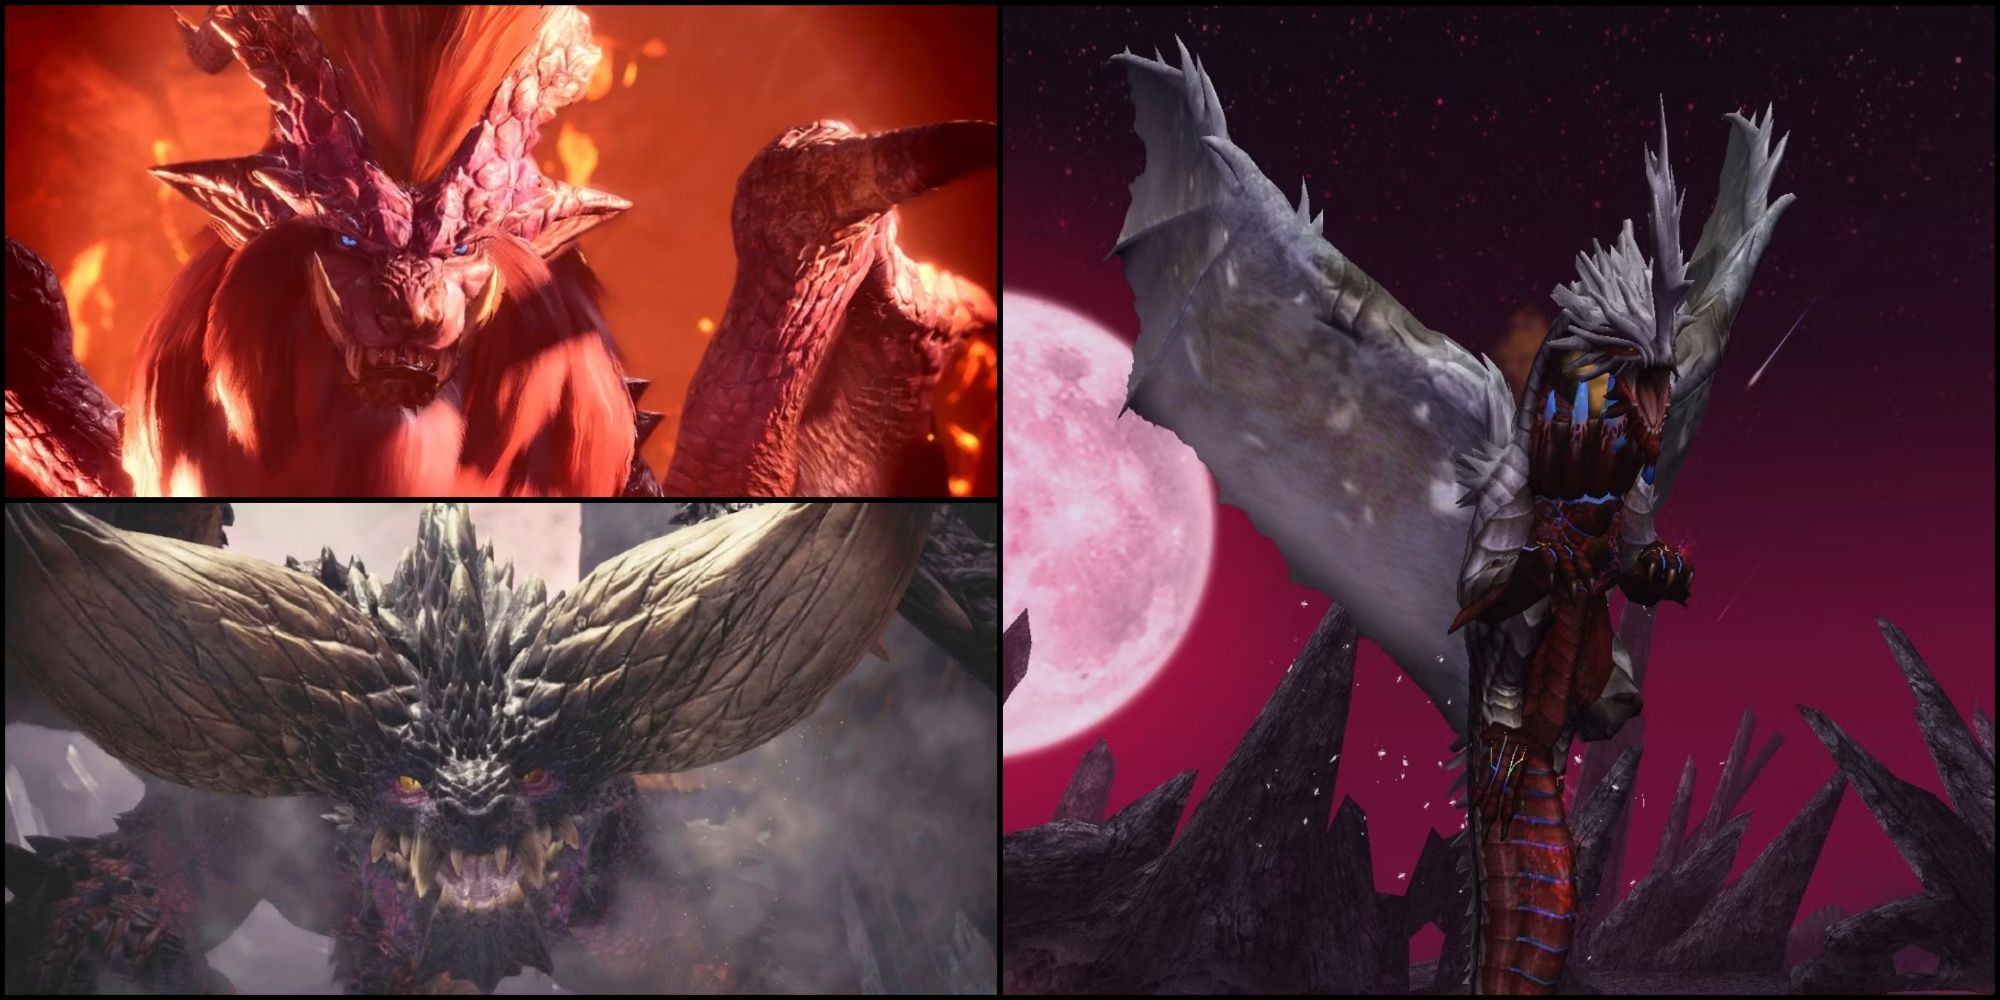 Teostra, Nergigante, and Disufiroa from Monster Hunter